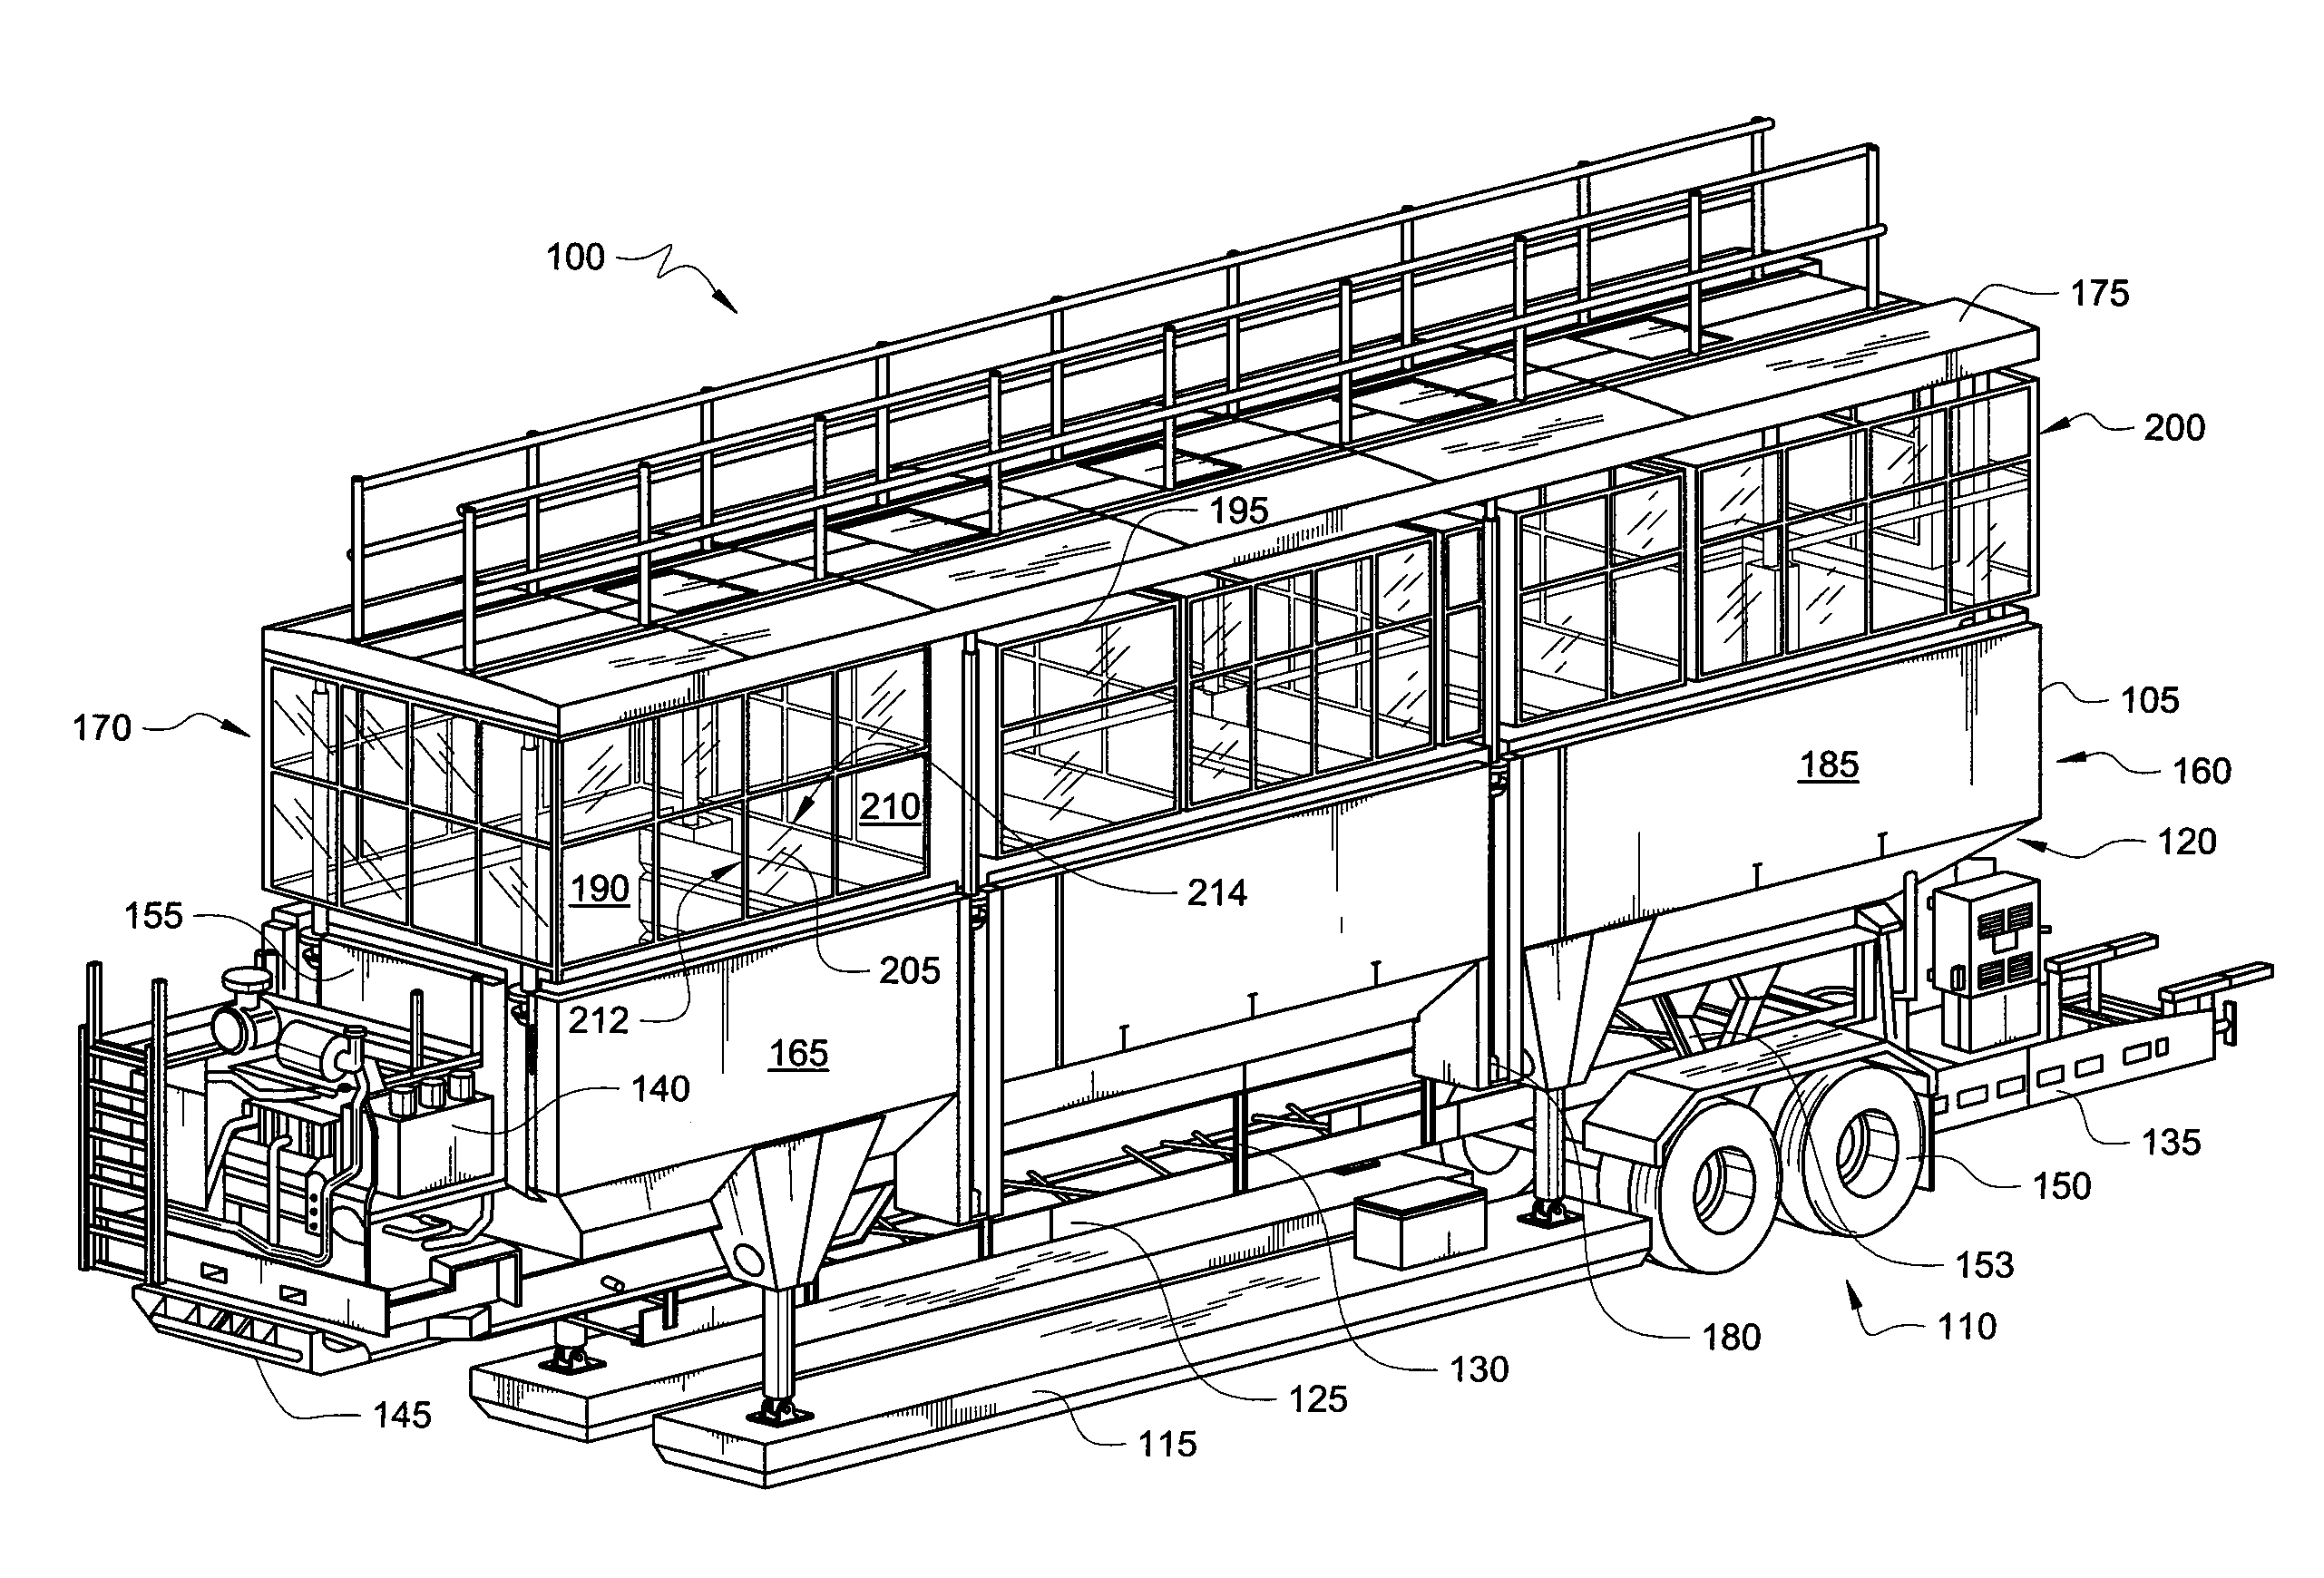 Apparatus for expandable storage and metering